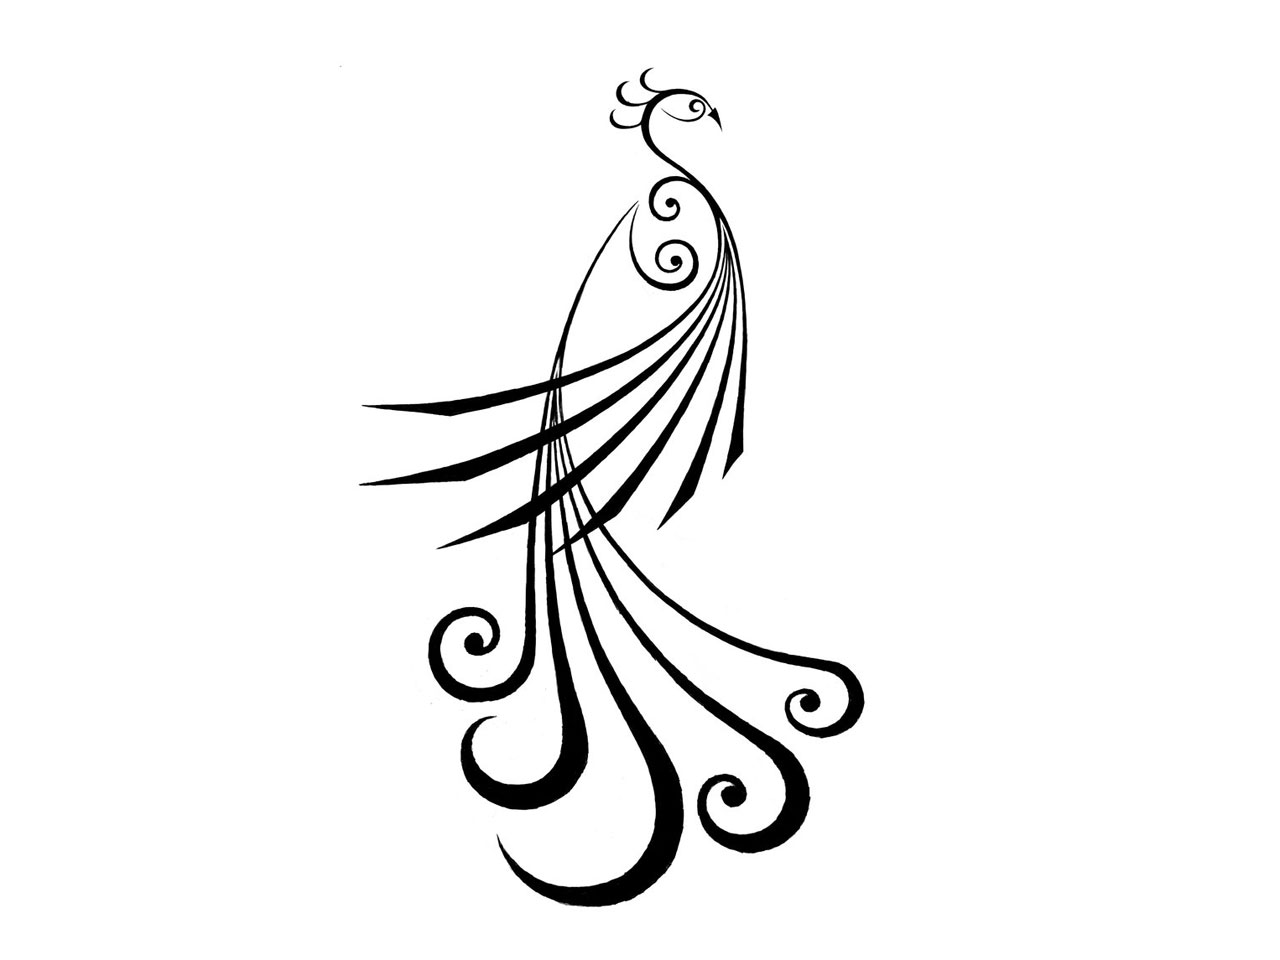 Beautiful Peacock Feathers Waterproof Temporary Tattoo For Boys Girls :  Amazon.in: Beauty